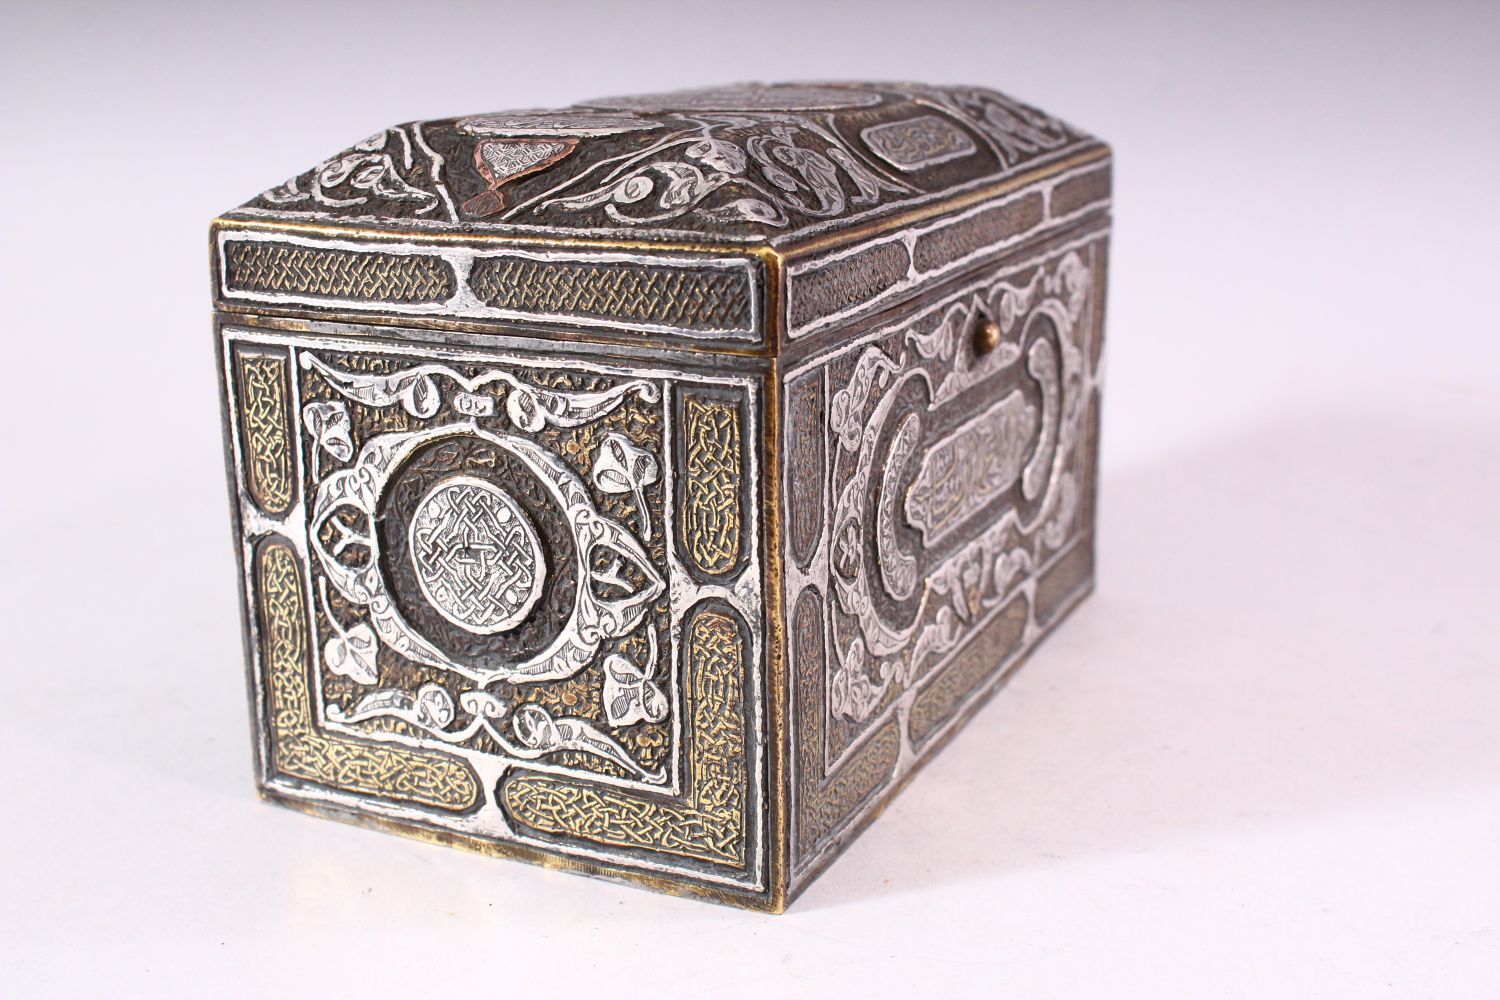 A GOOD 19TH CENTURY SYRIAN SILVER, COPPER AND BRASS RECTANGULAR CASKET, with panels of calligraphy - Image 5 of 10